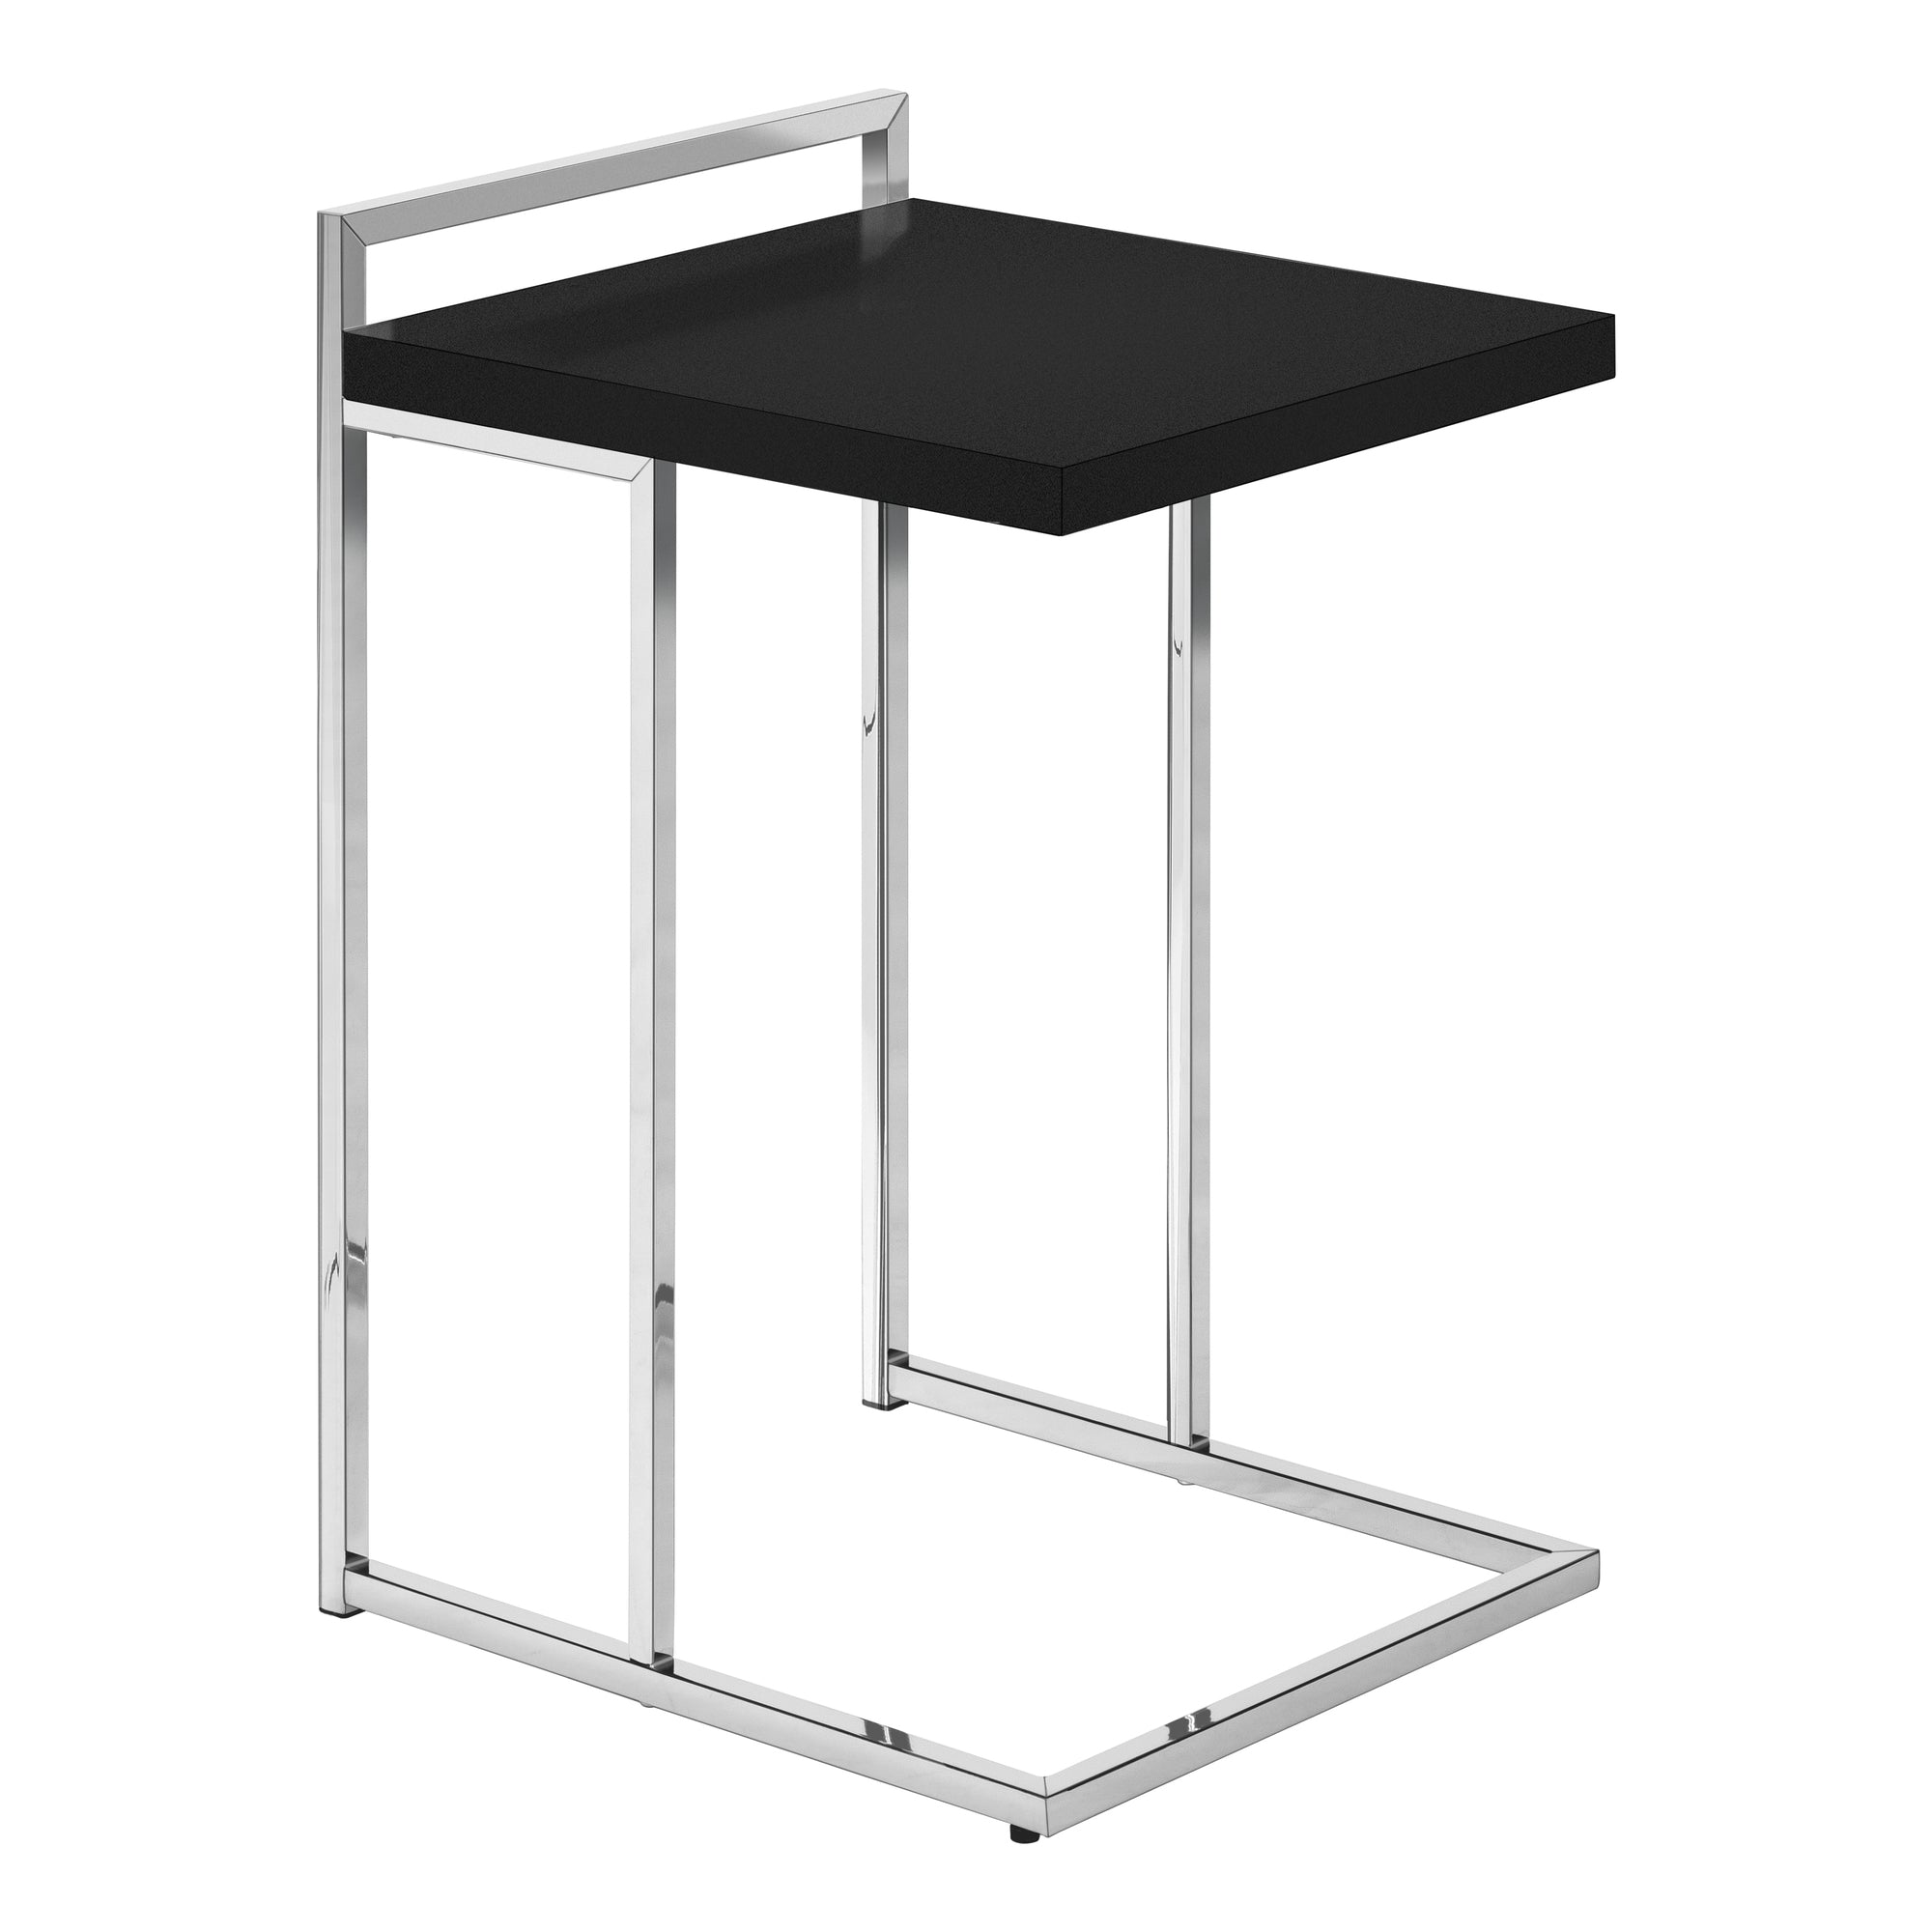 MN-893640    Accent Table, C-Shaped, End, Side, Snack, Living Room, Bedroom, Metal Frame, Laminate, Black, Chrome, Contemporary, Modern